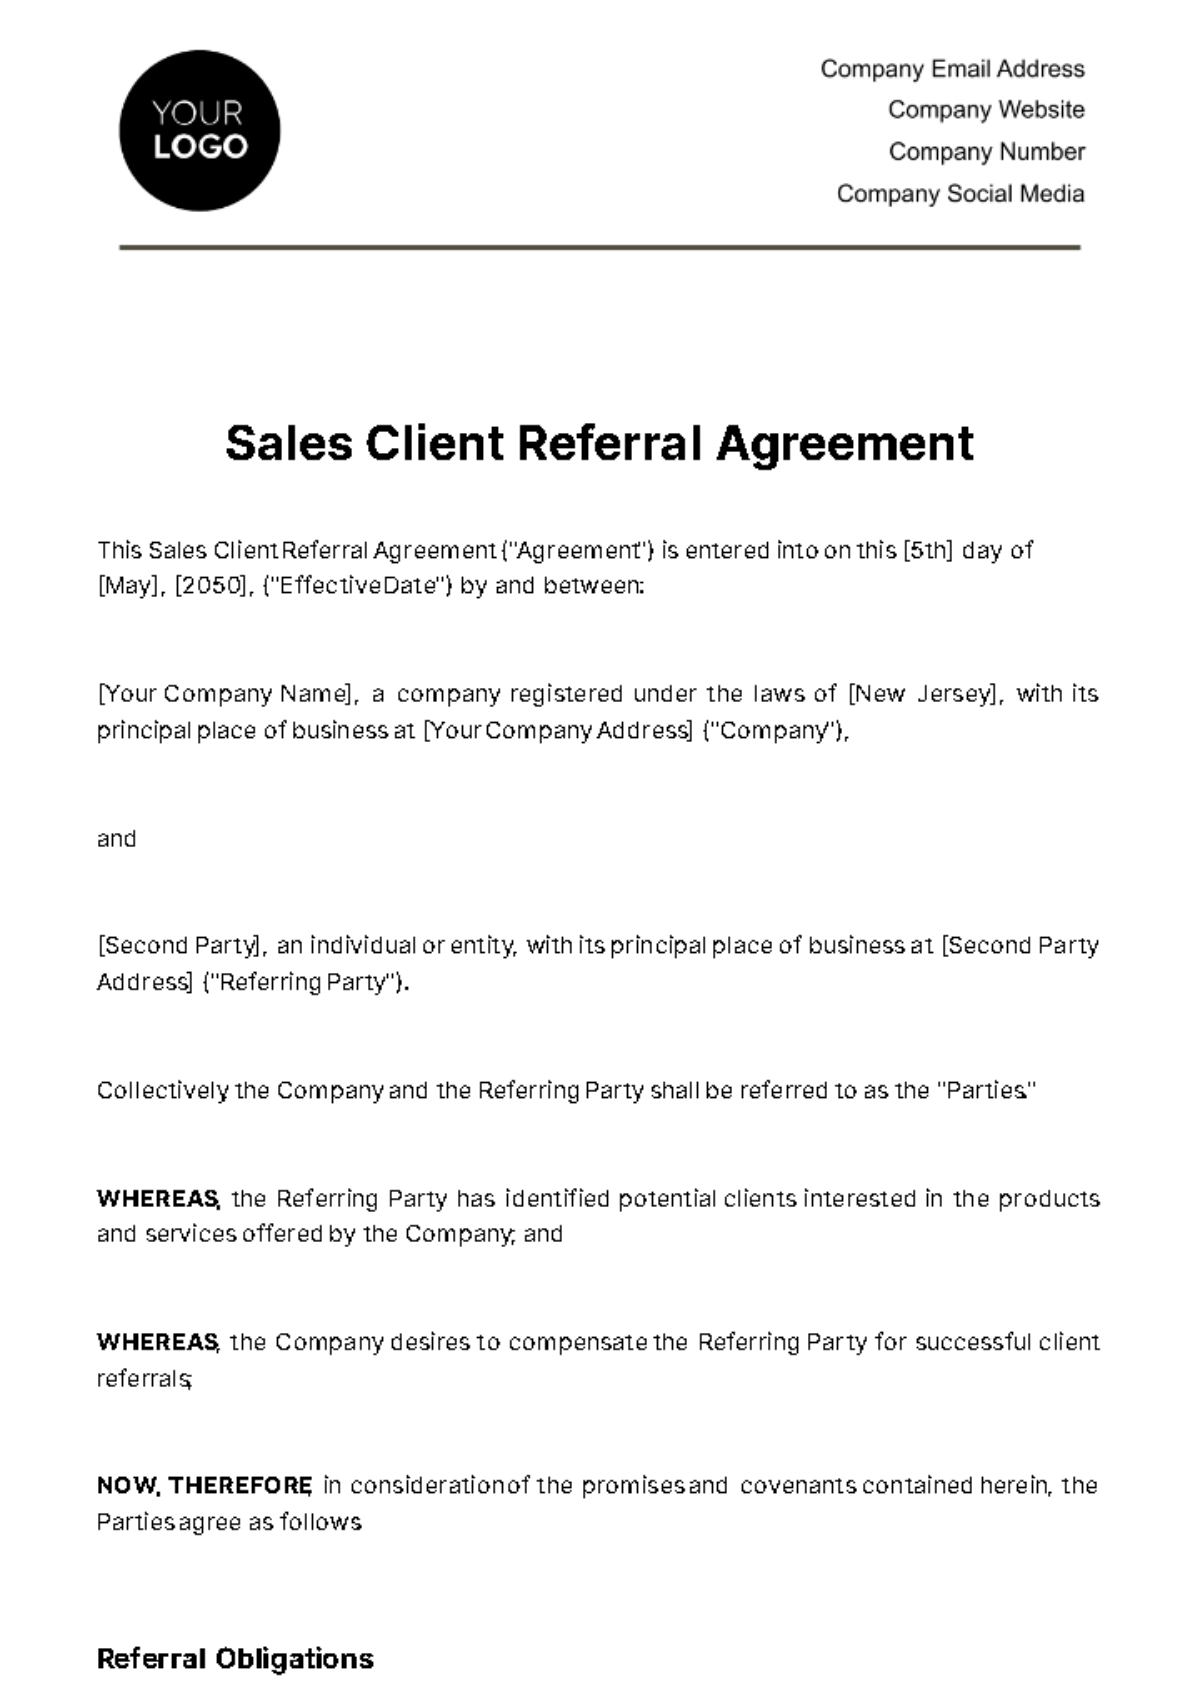 Sales Client Referral Agreement Template